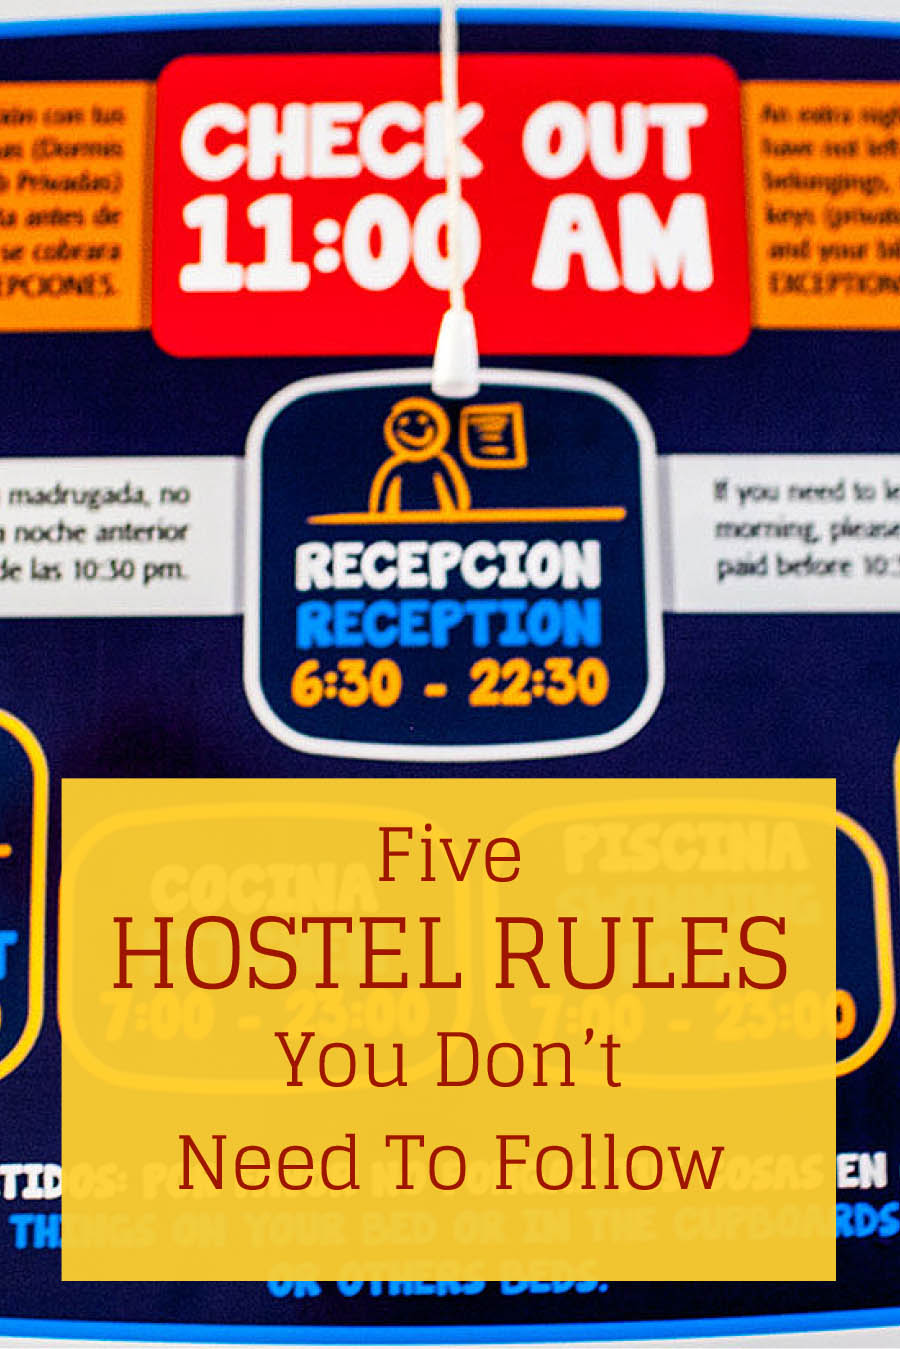 Five Hostel Rules You Don't Need to Follow